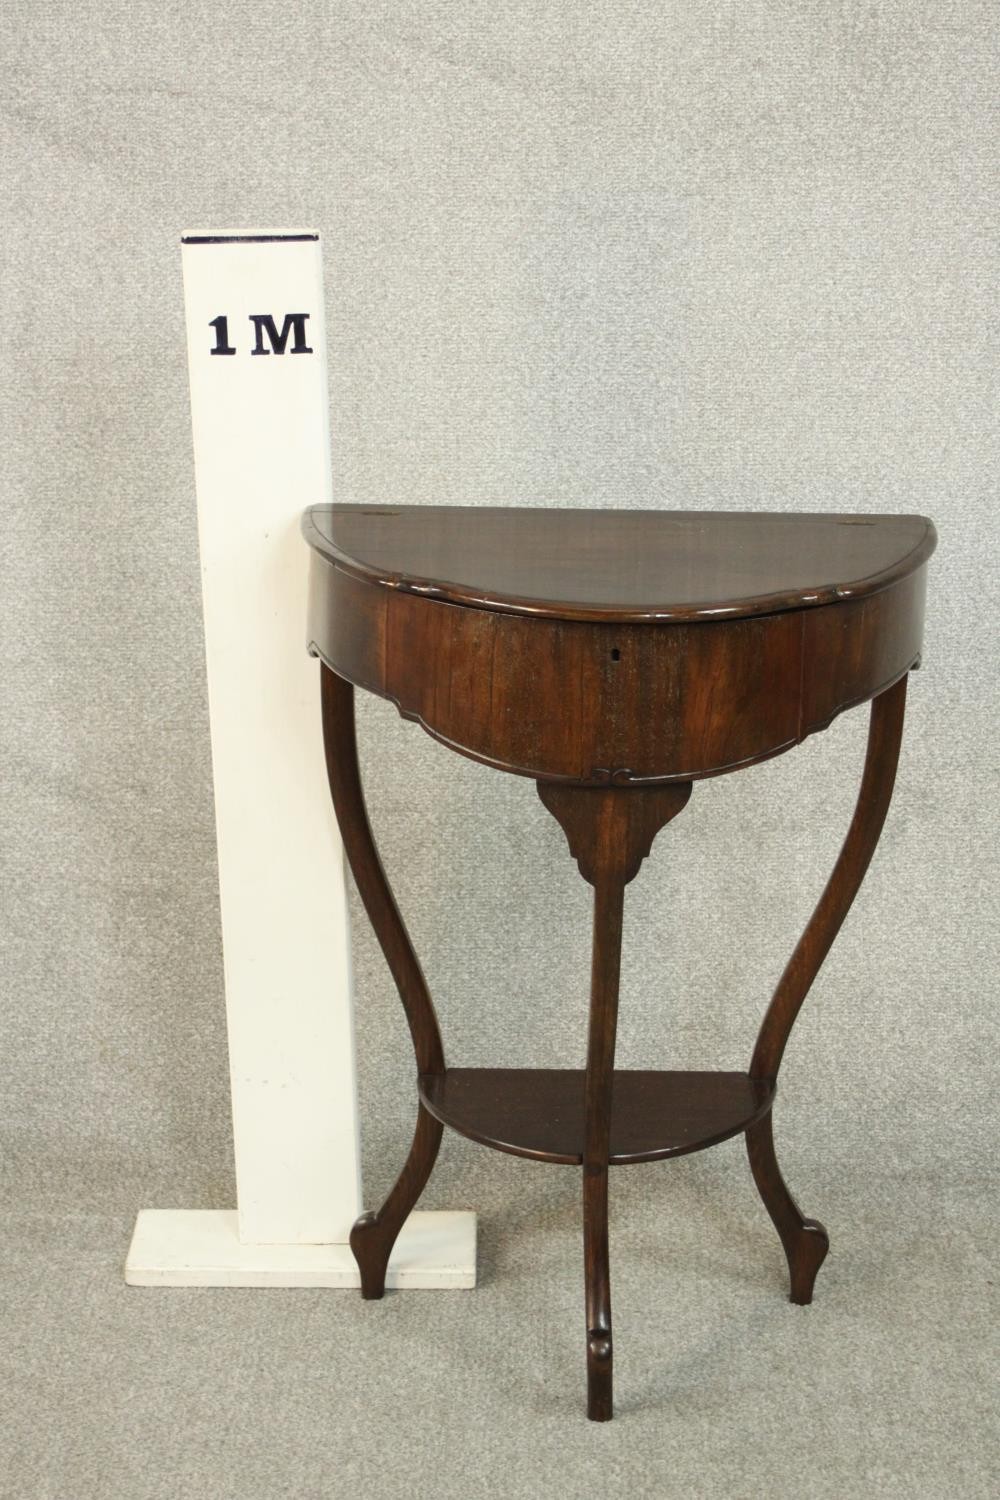 An early 20th century mahogany demi lune side table, with a foldover top opening to reveal a - Image 2 of 7